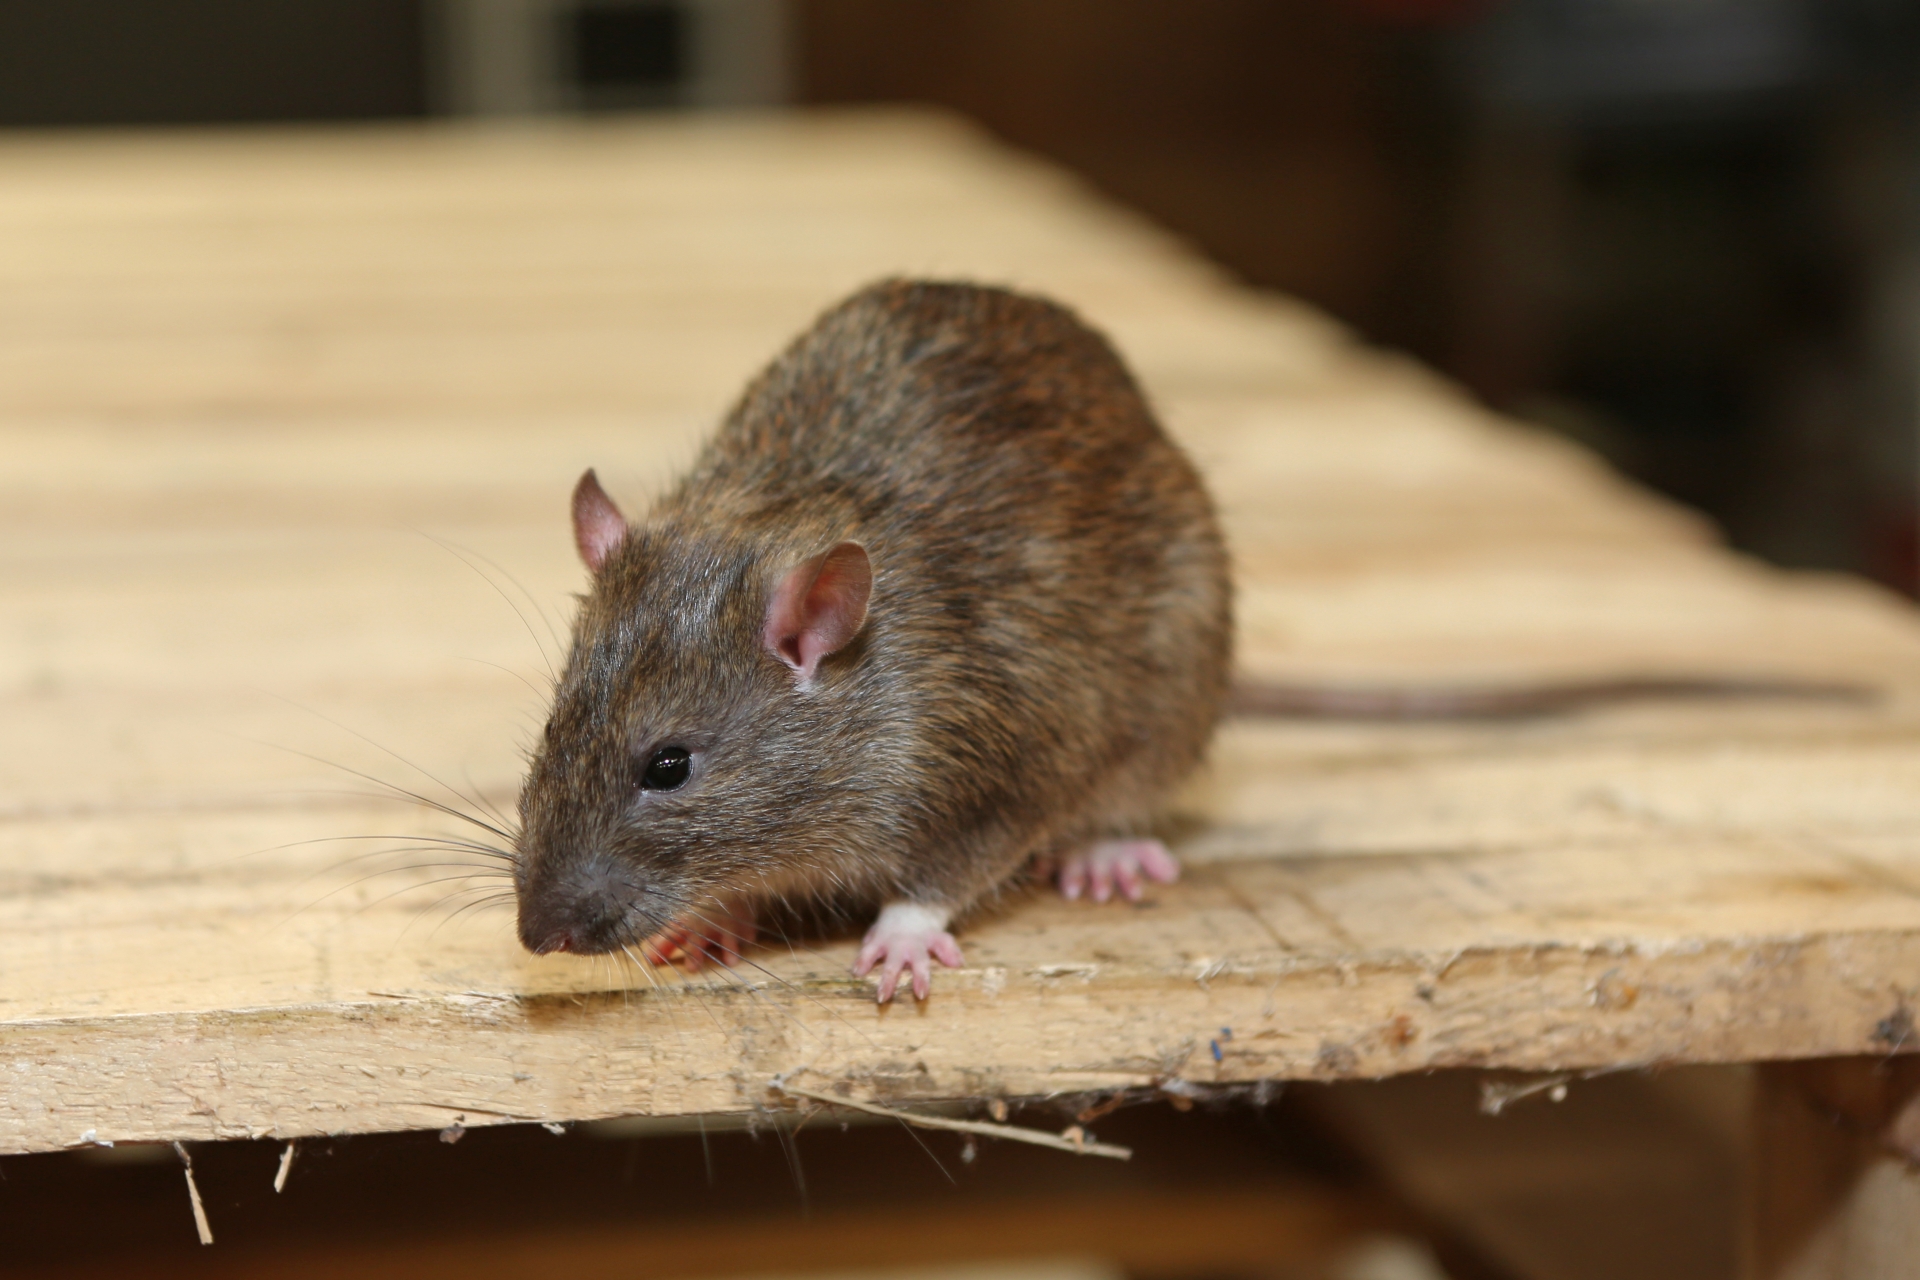 Rat Control, Pest Control in Southgate, N14. Call Now 020 8166 9746